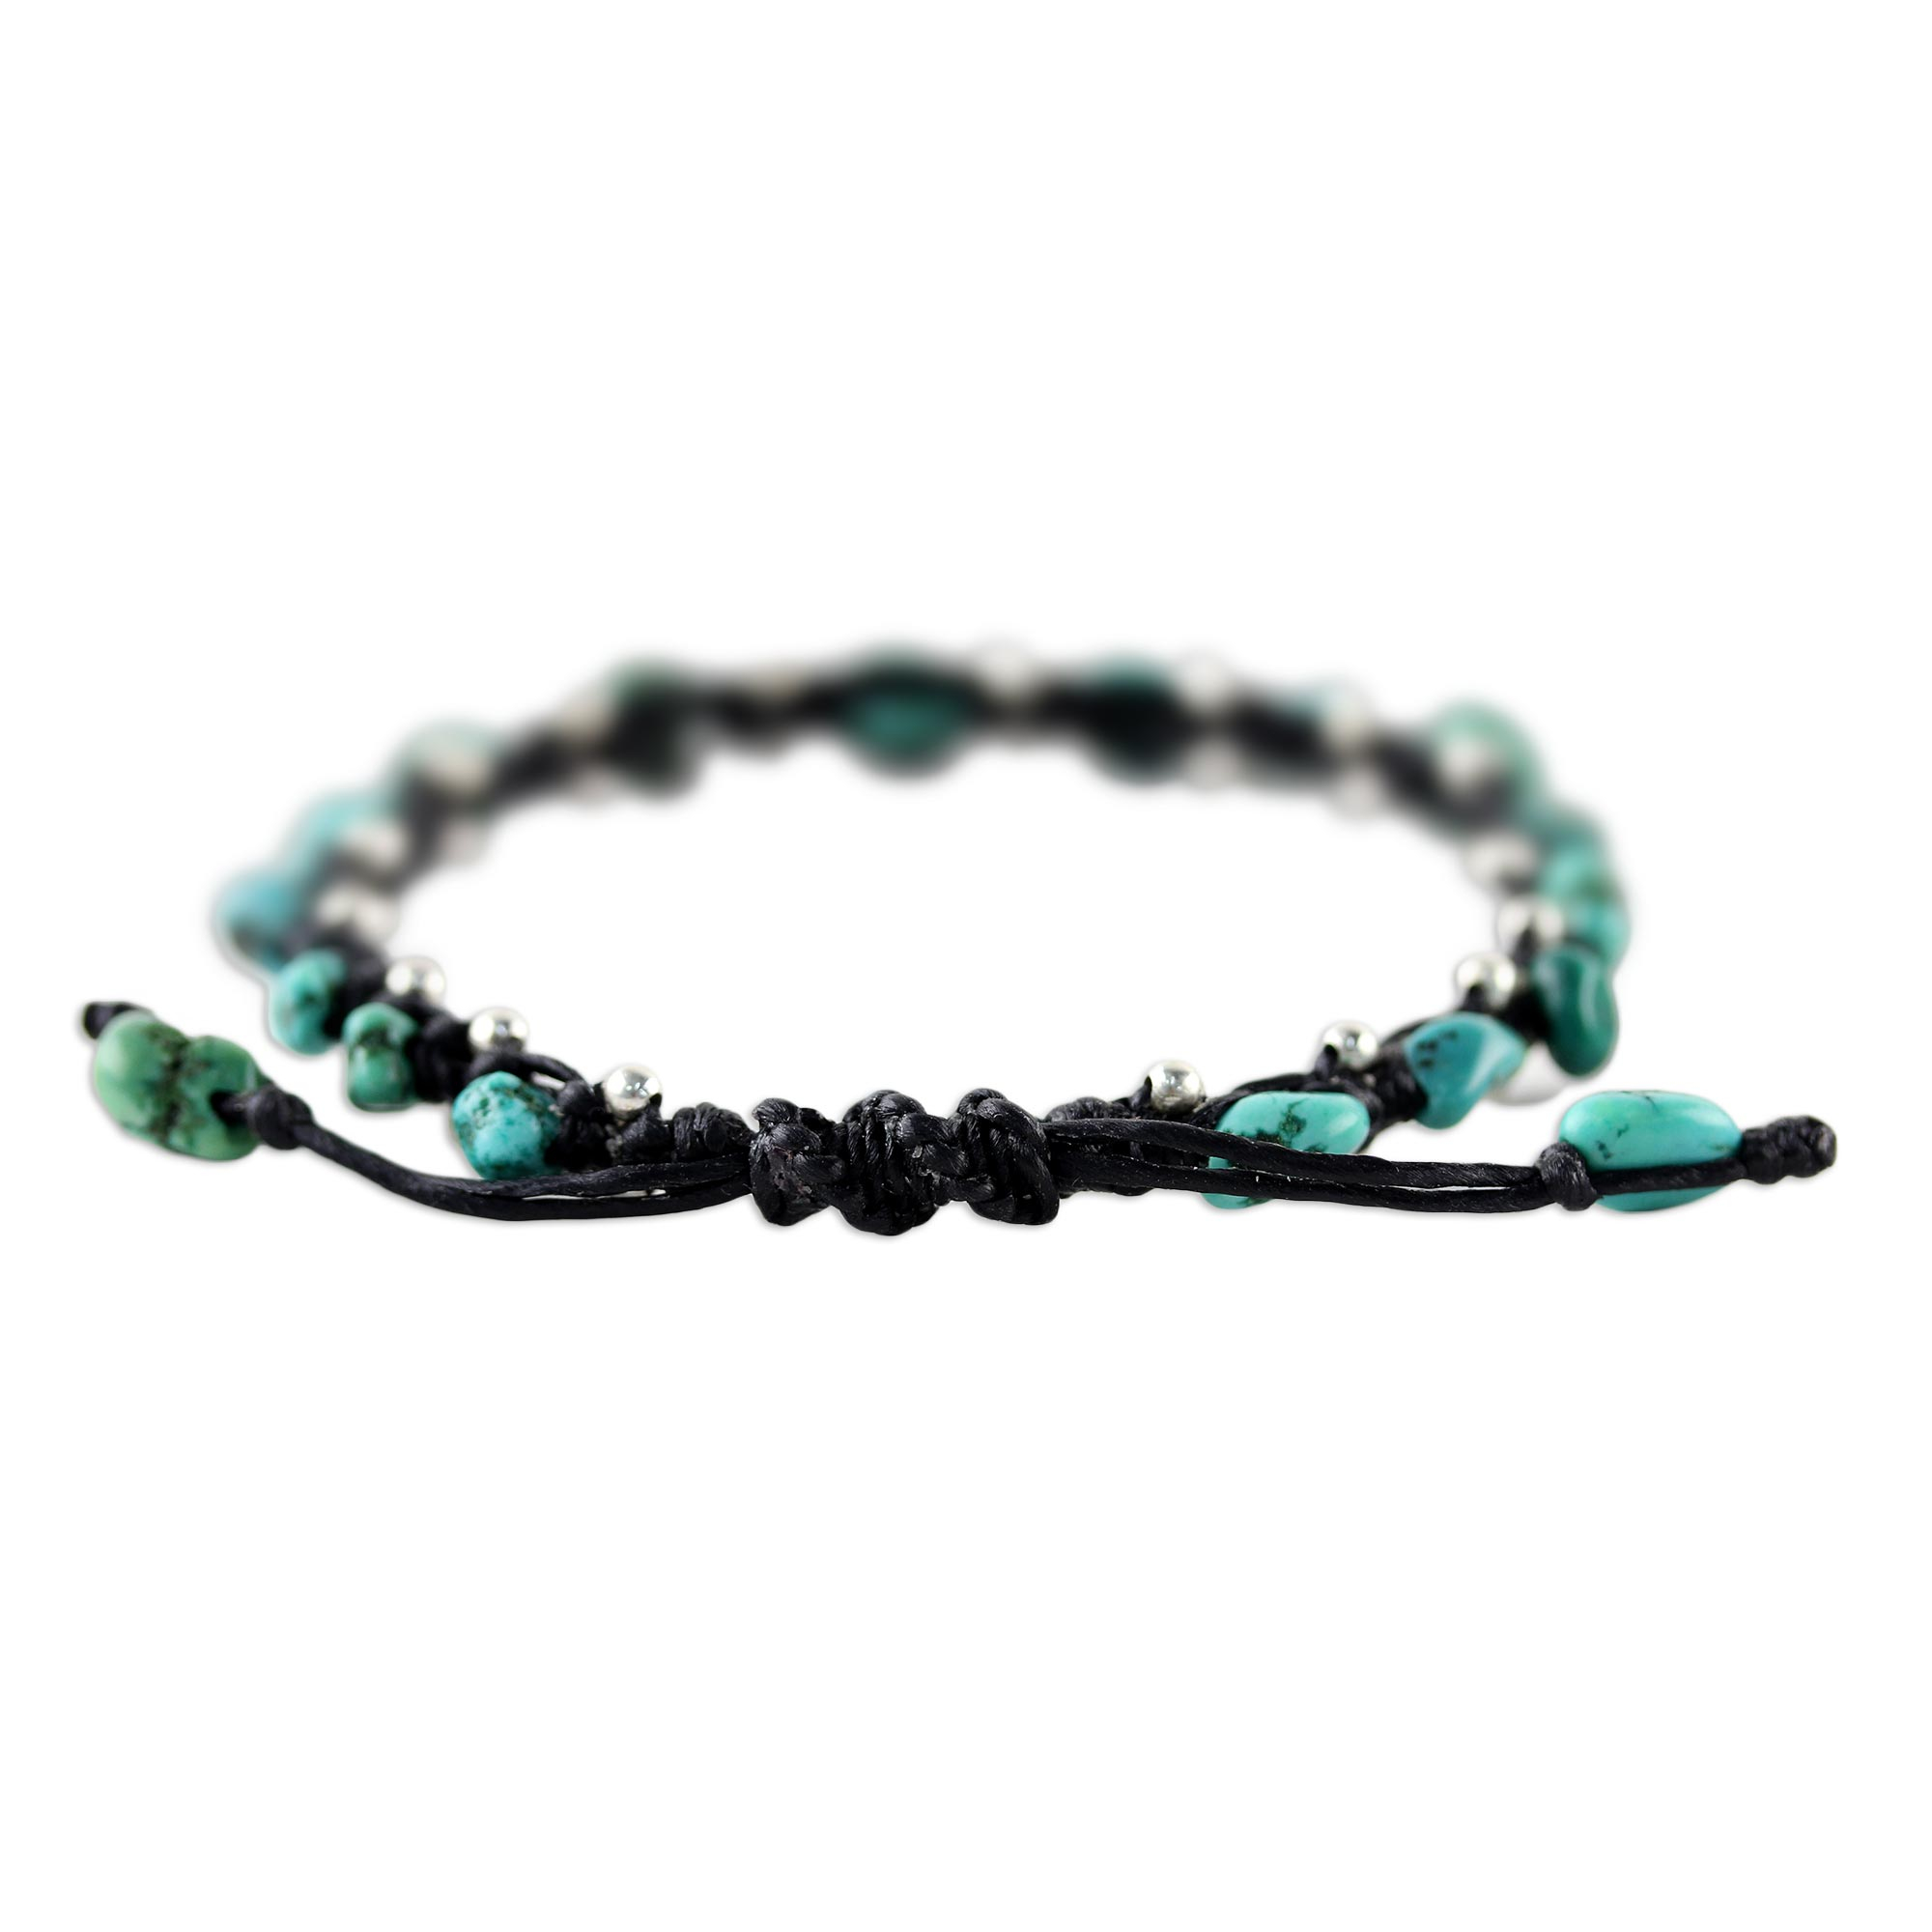 Thai Jewelry Braided Bracelet Turquoise Color 925 Silver - Turquoise ...